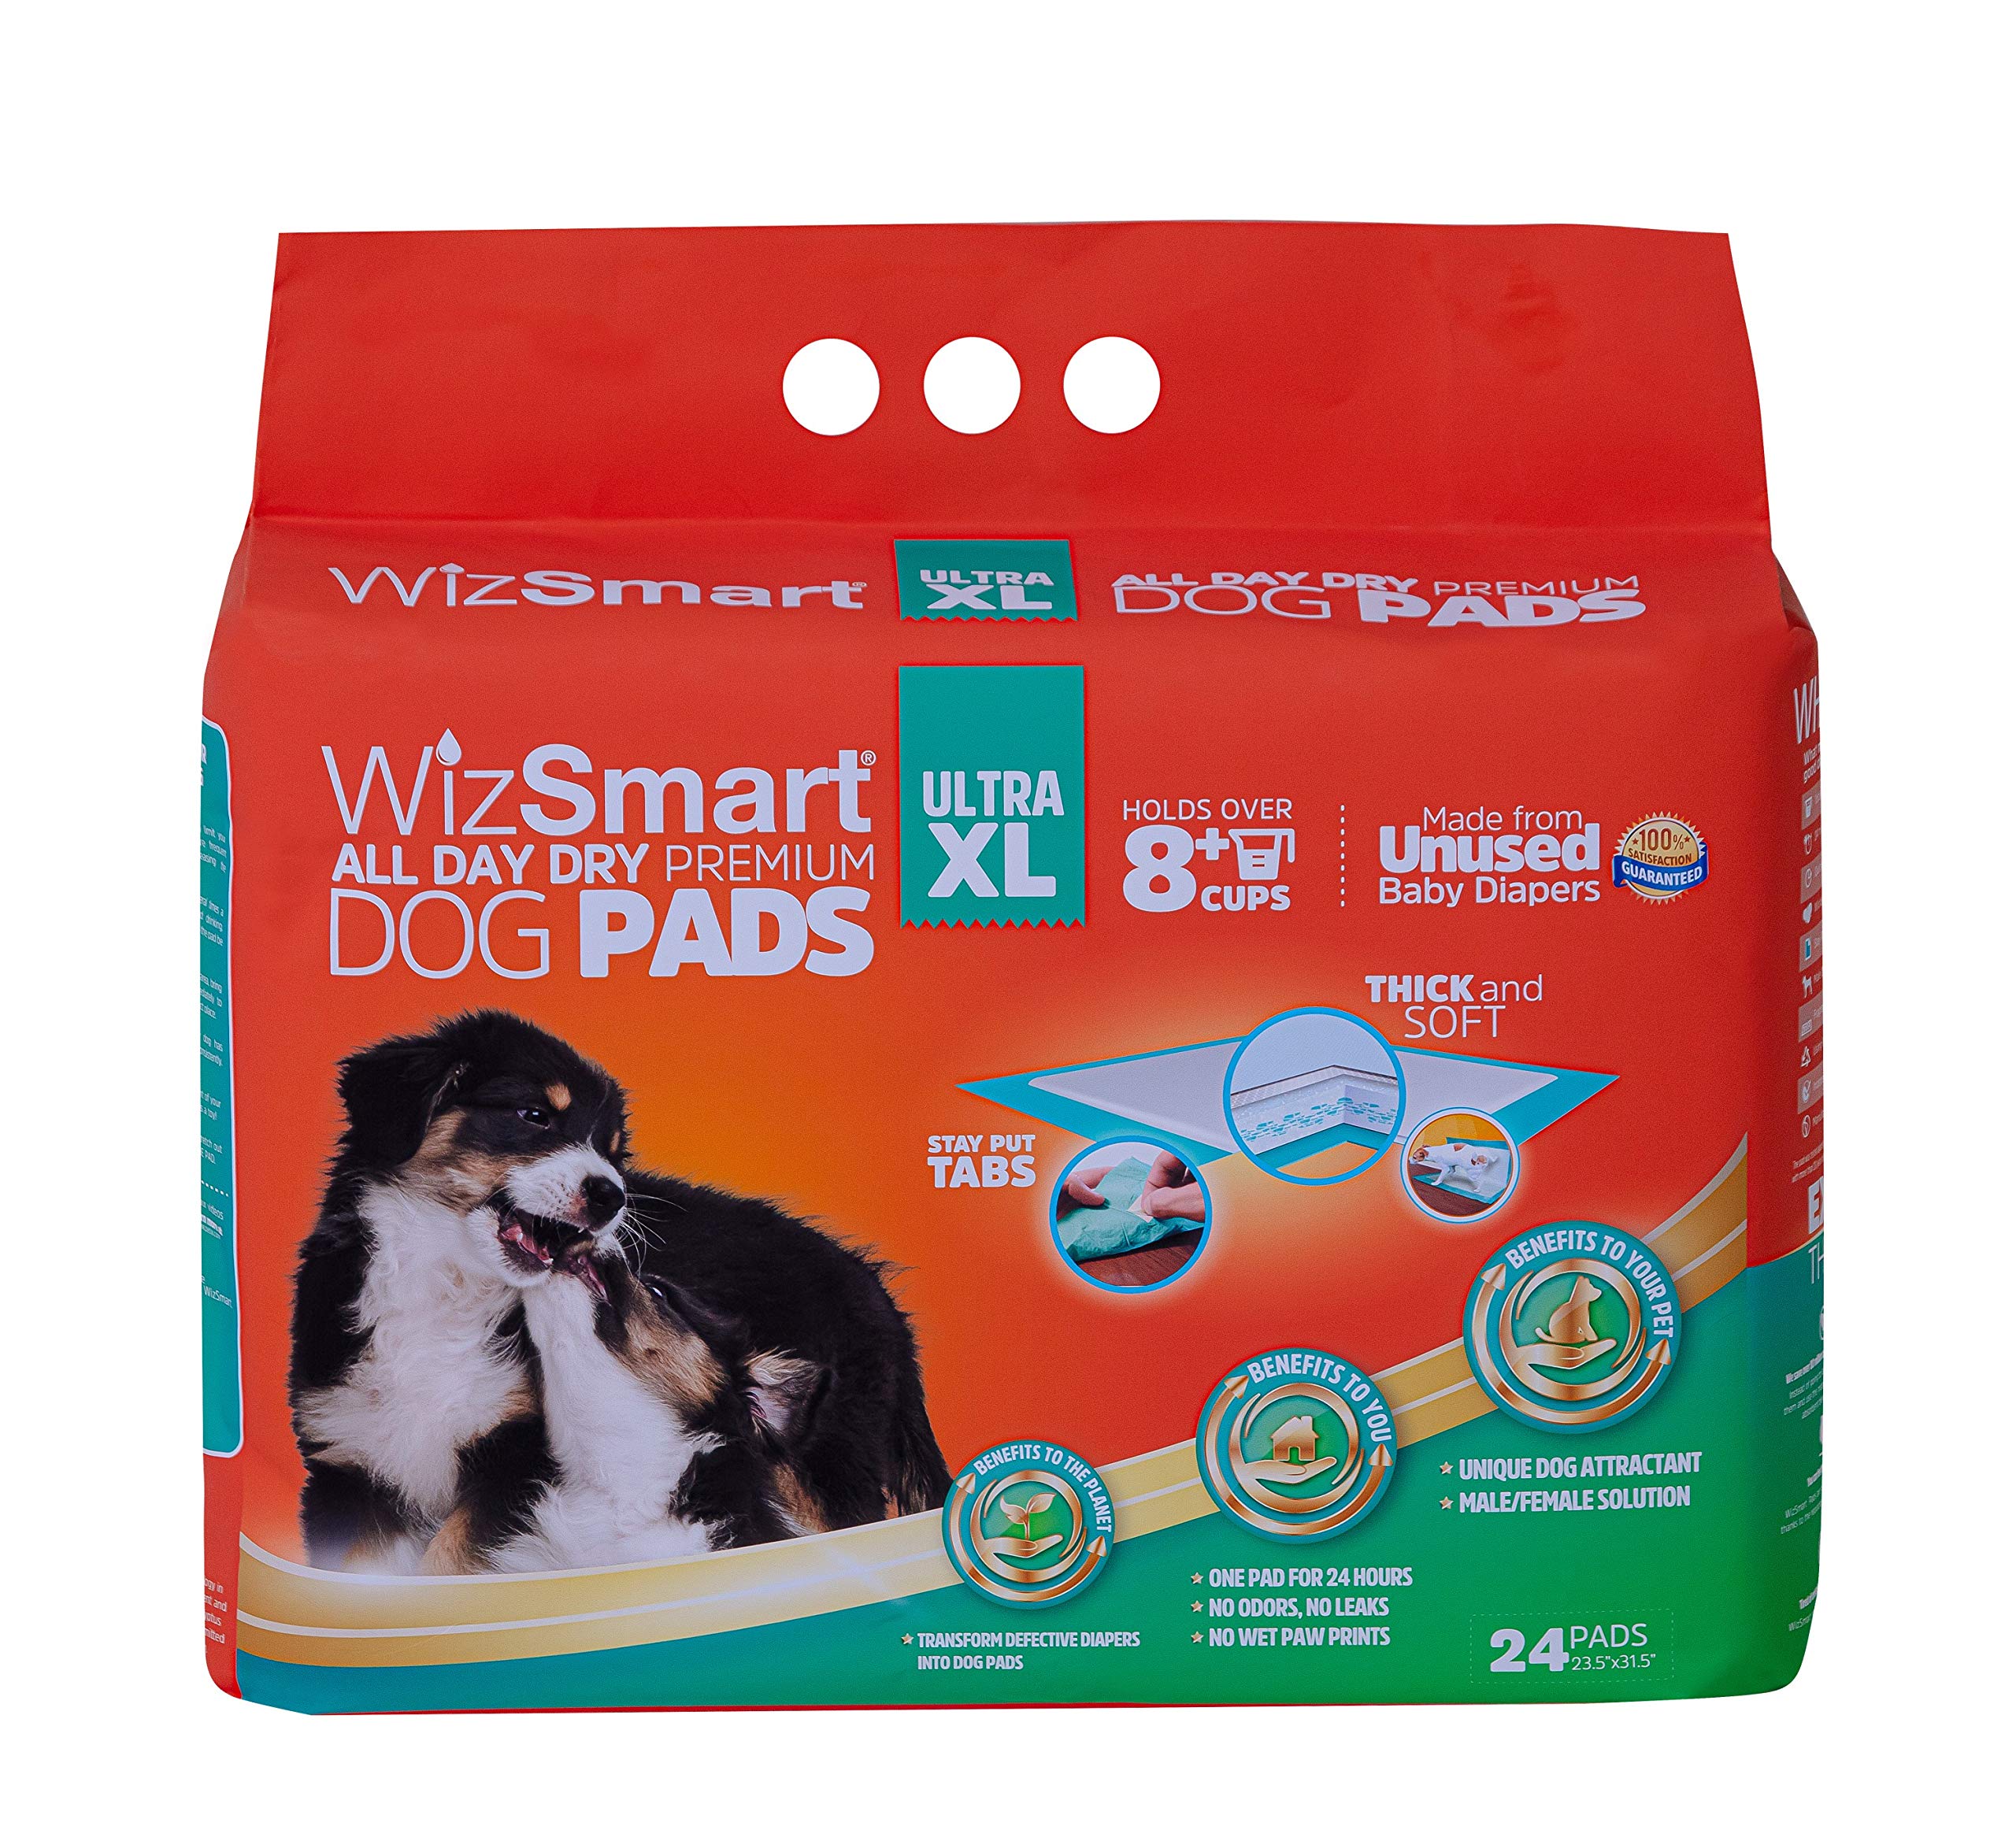 WizSmart All-Day Dry Premium Dog and Puppy Potty Training Pads Quick Drying Absorbent and Odor Free with Stay Put Tabs 10+ cup U